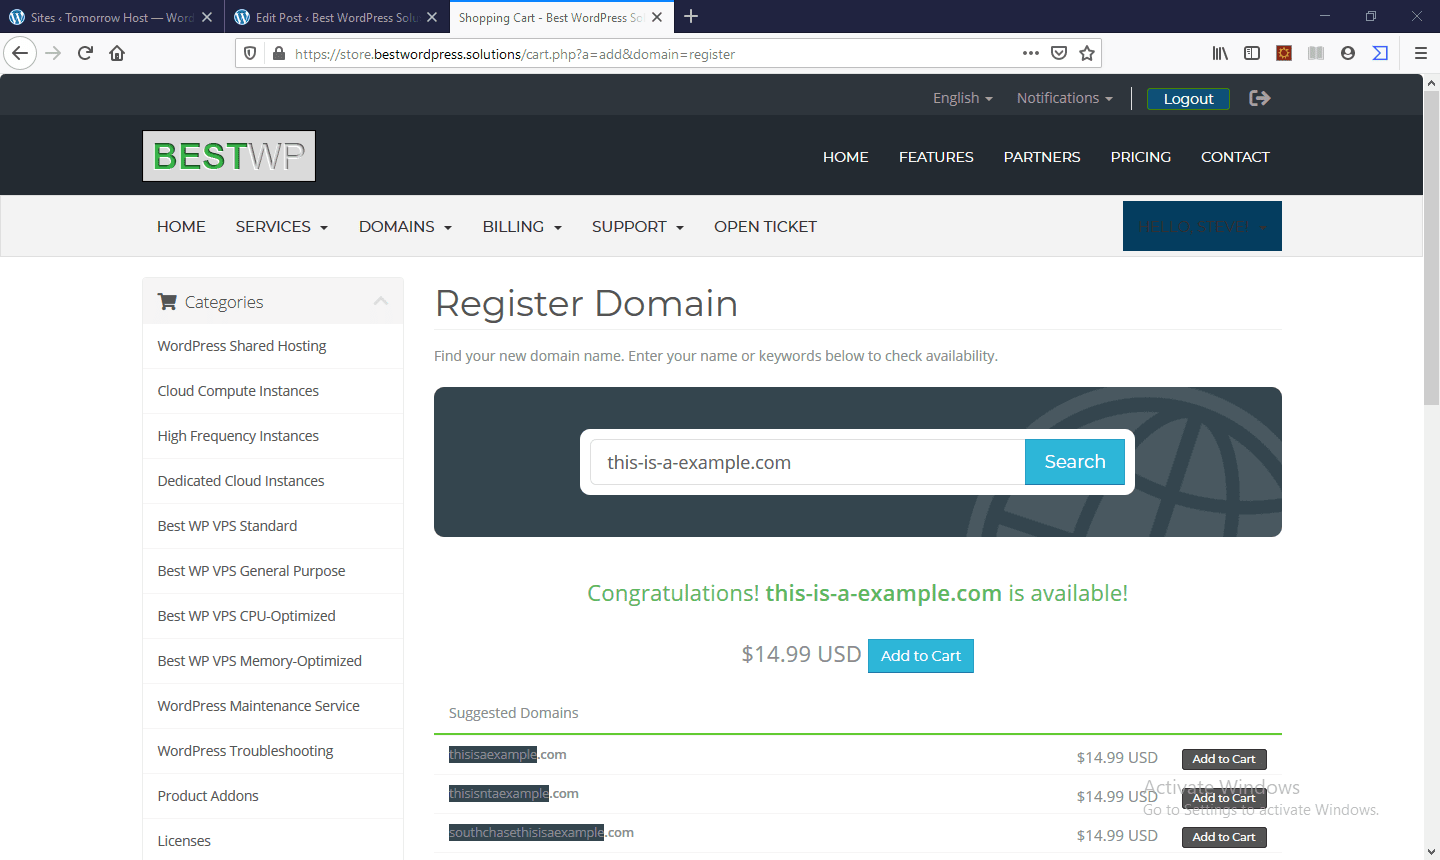 HOW DO I REGISTER A DOMAIN NAME FROM CLIENT AREA?